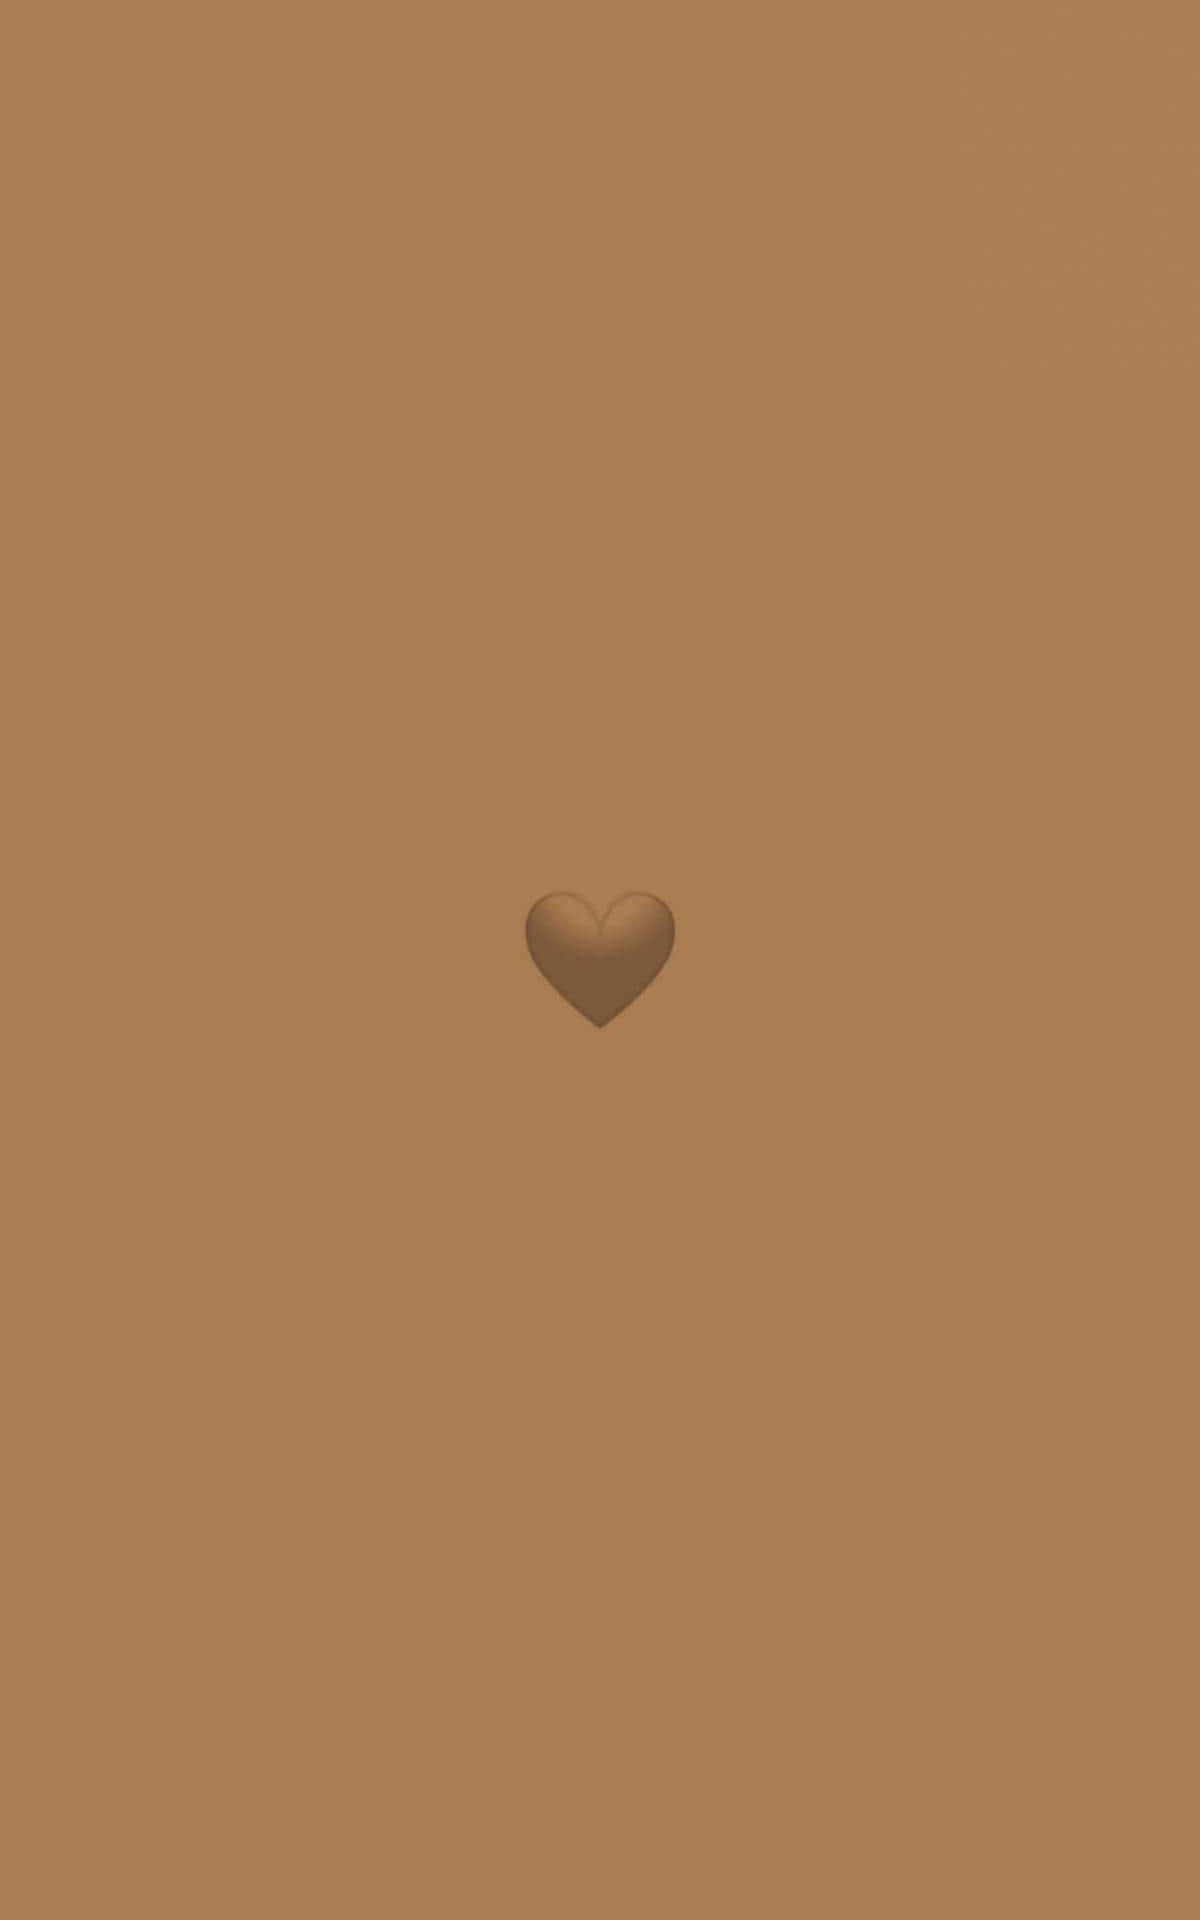 Download Minimalist Brown Aesthetic With Heart Wallpaper